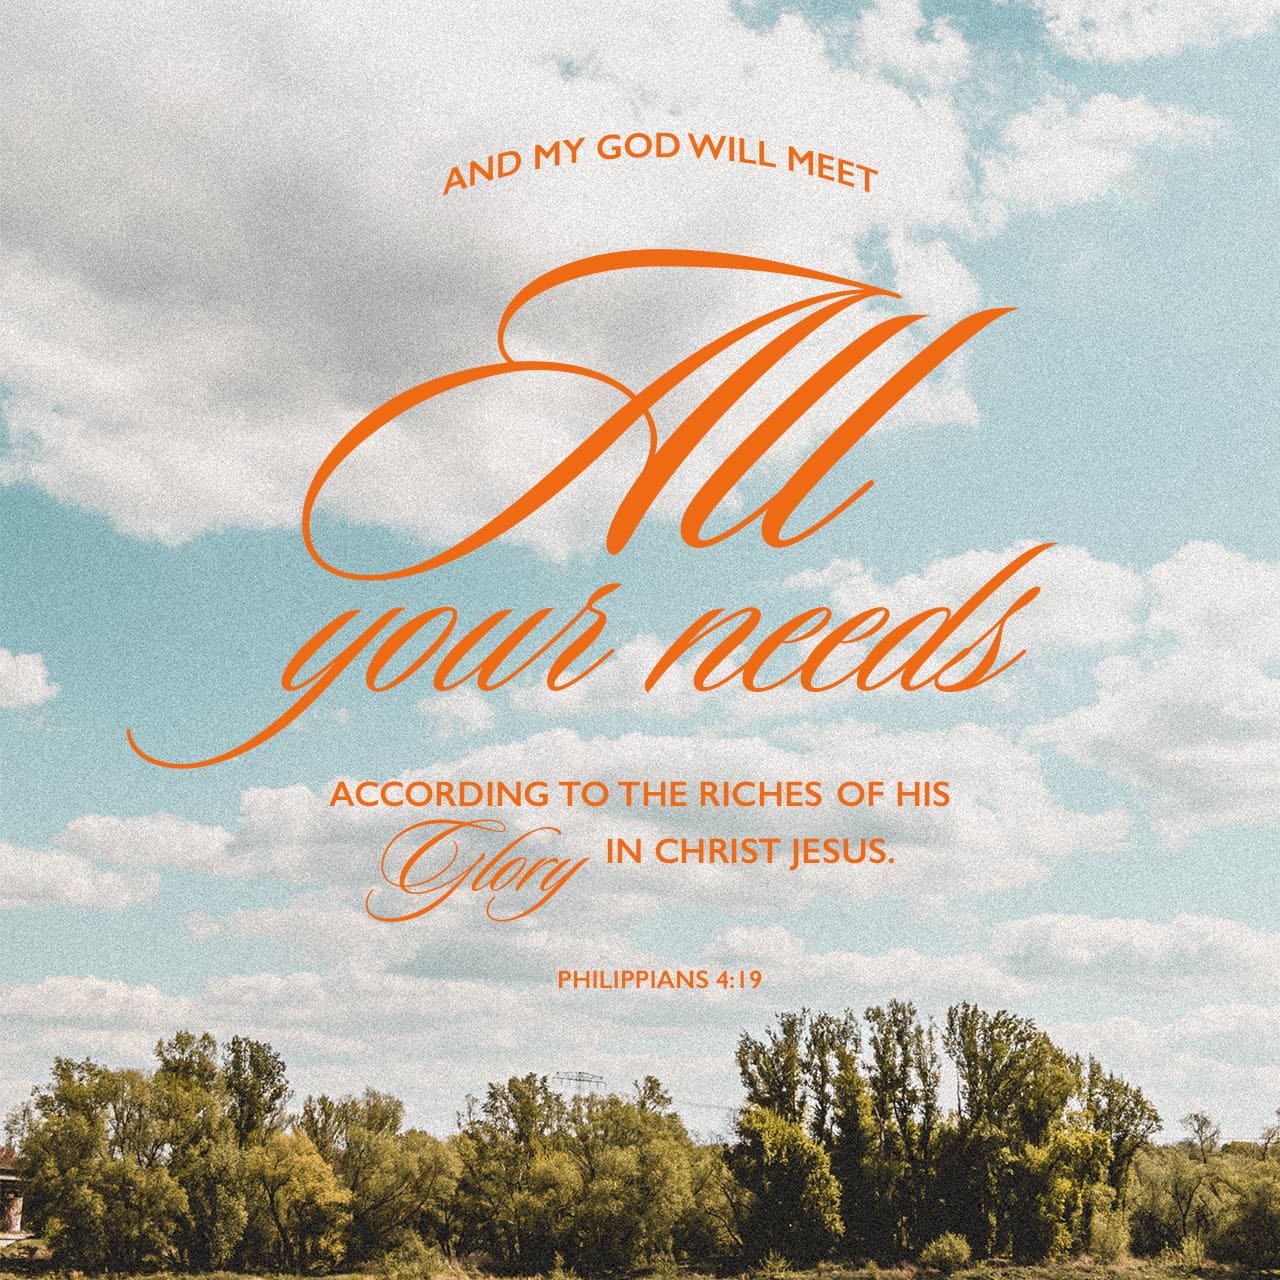 Philippians 4:19 But my God shall supply all your need according